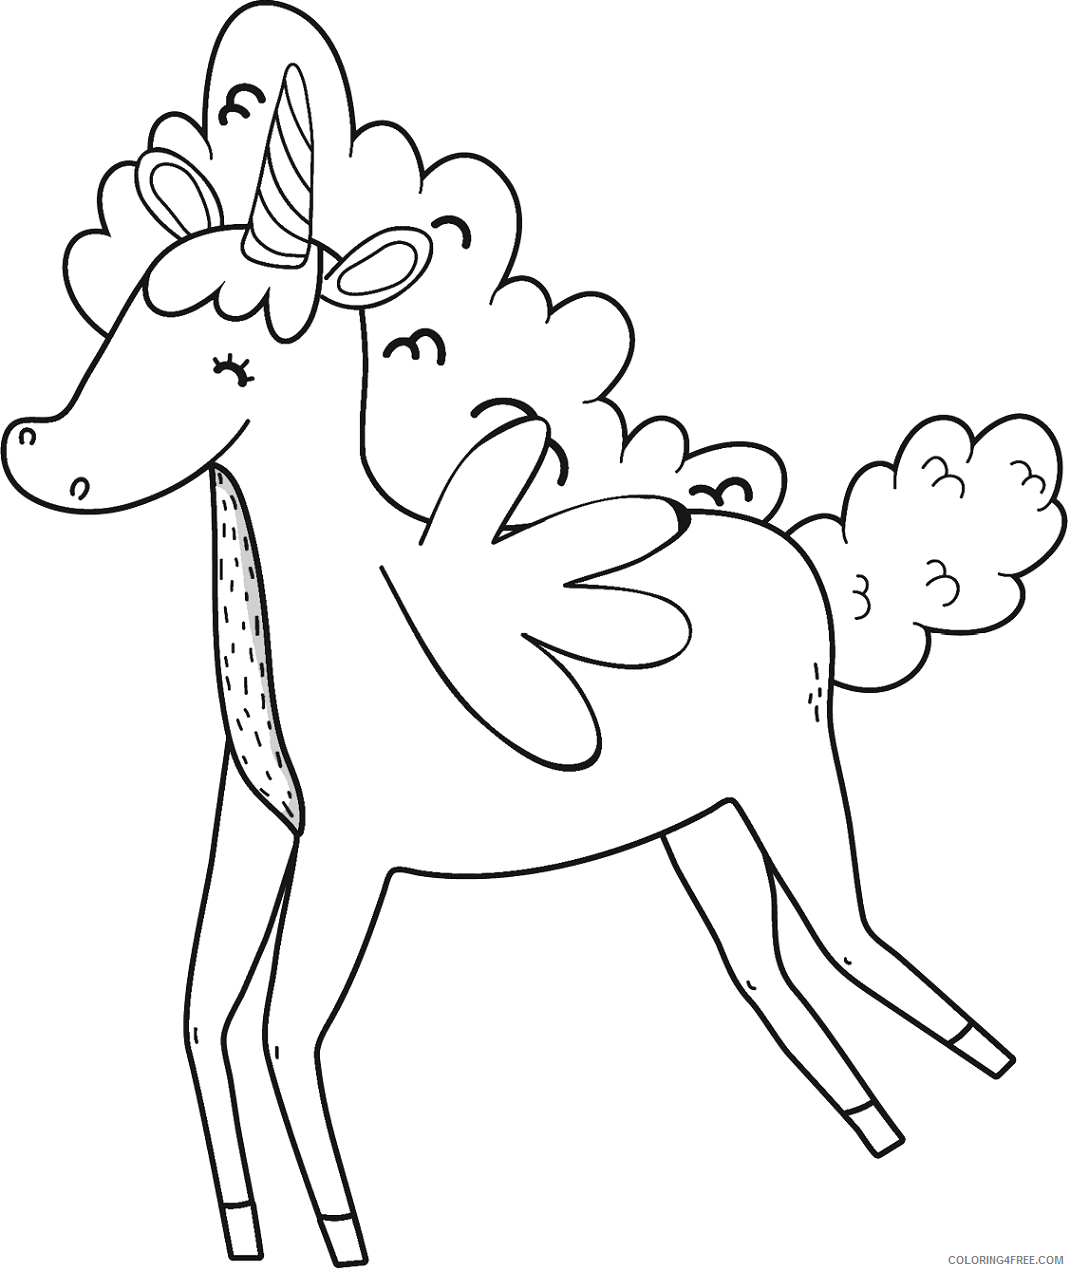 Winged Unicorn Coloring Pages unicorn_has_cute_wings Printable 2021 6295 Coloring4free